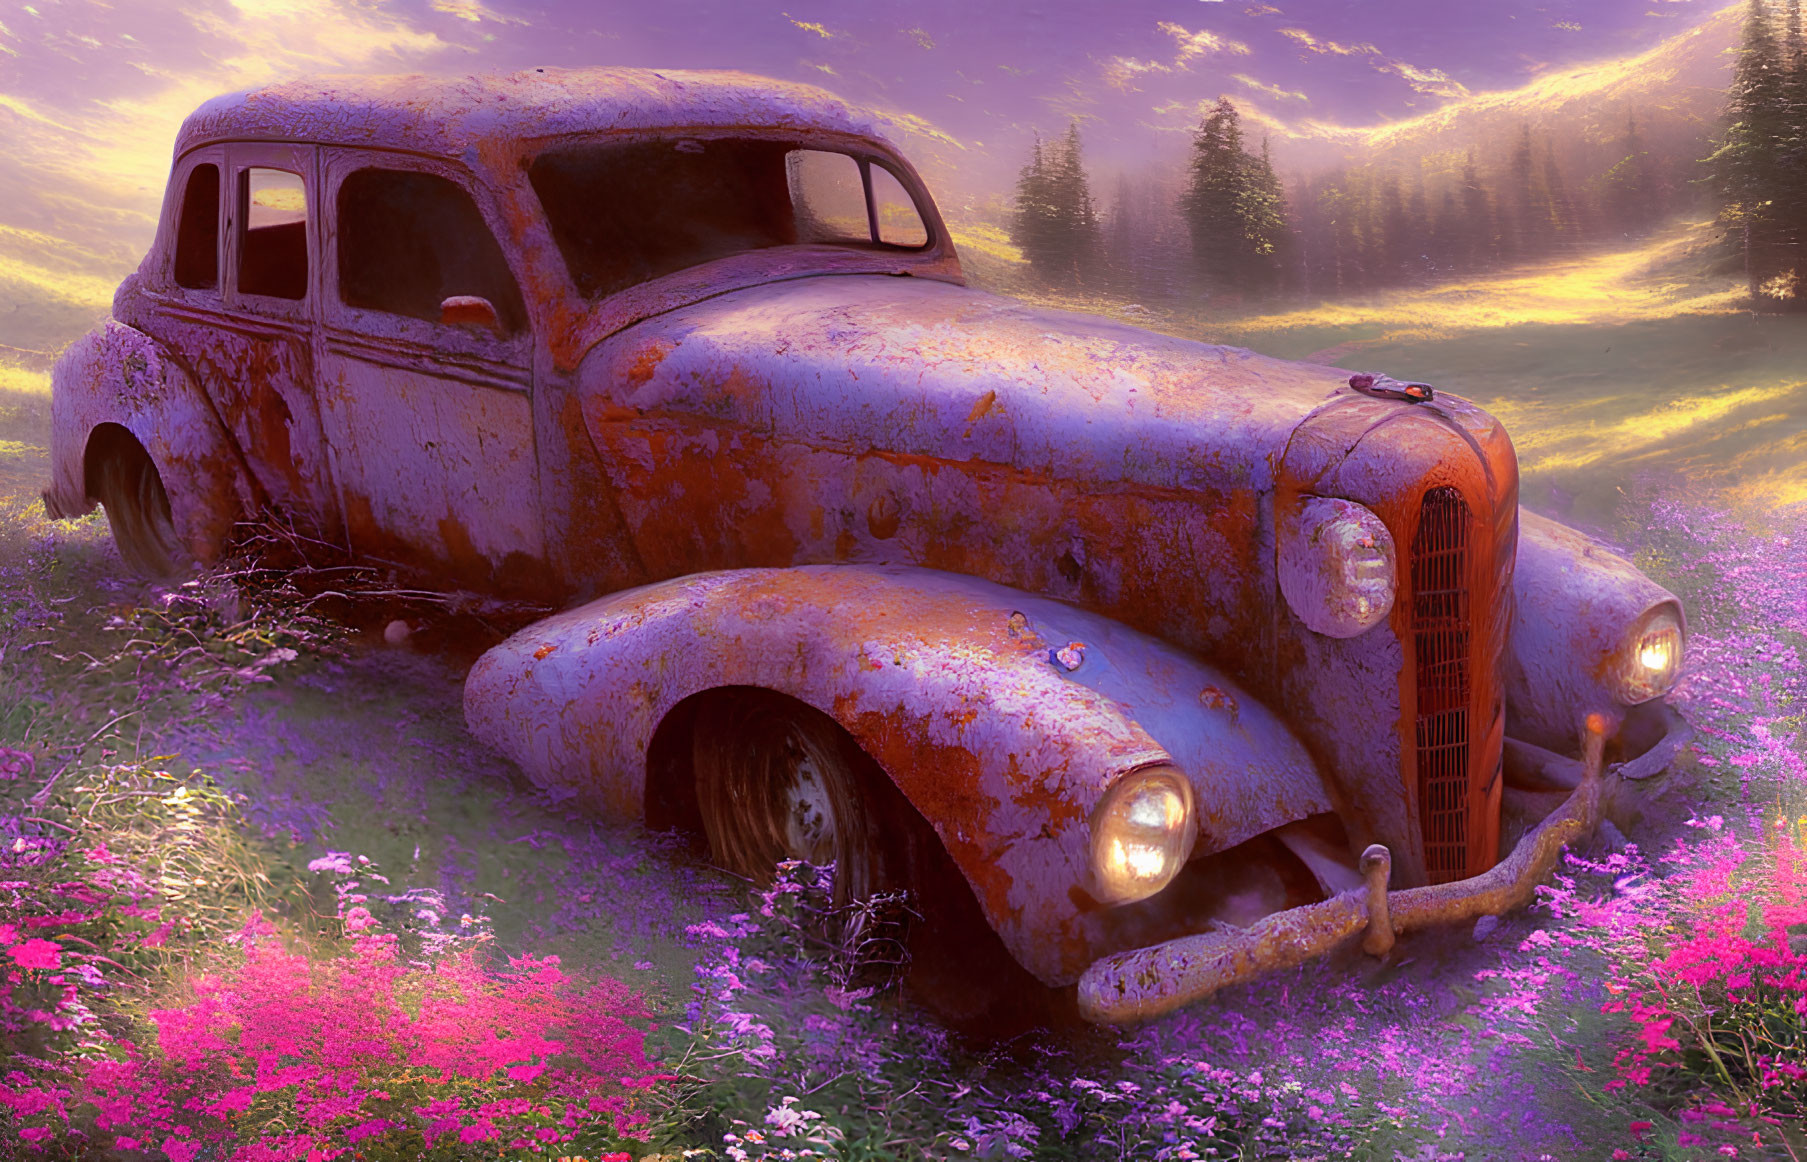 Rusty car with headlights in foggy forest clearing at sunrise or sunset